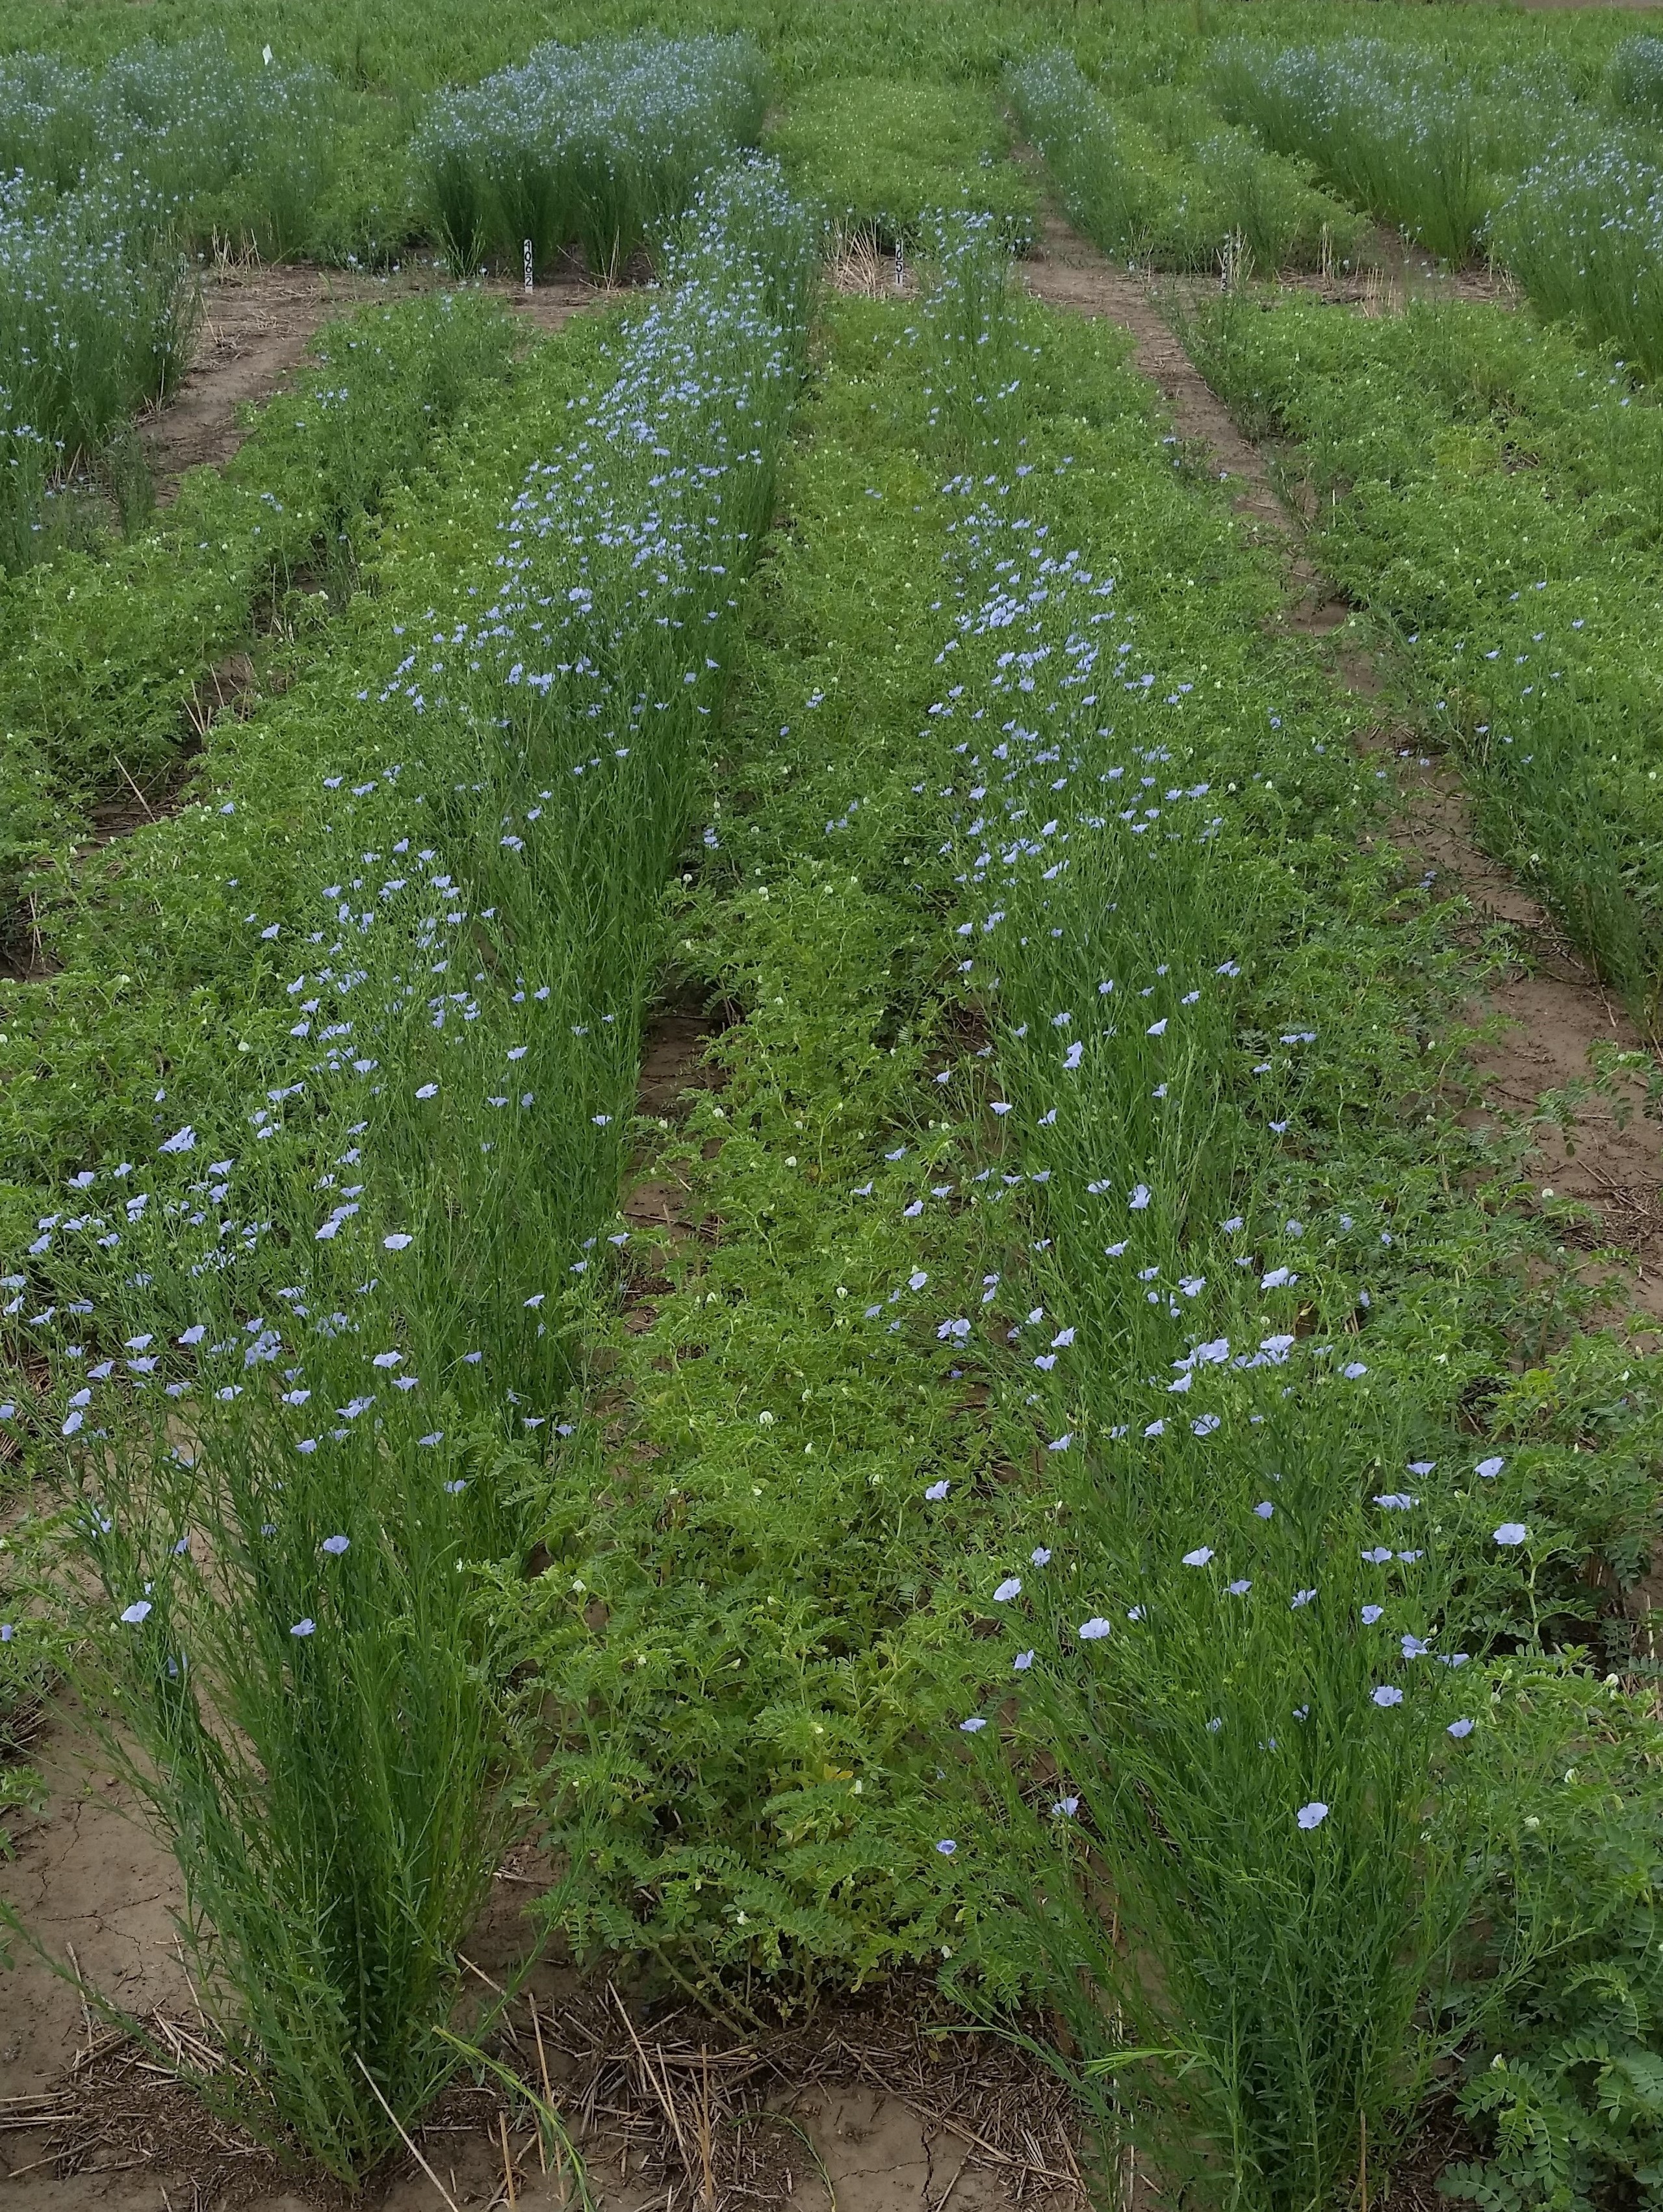 Chickpeas and flax are grown in alternating rows. (NDSU photo)